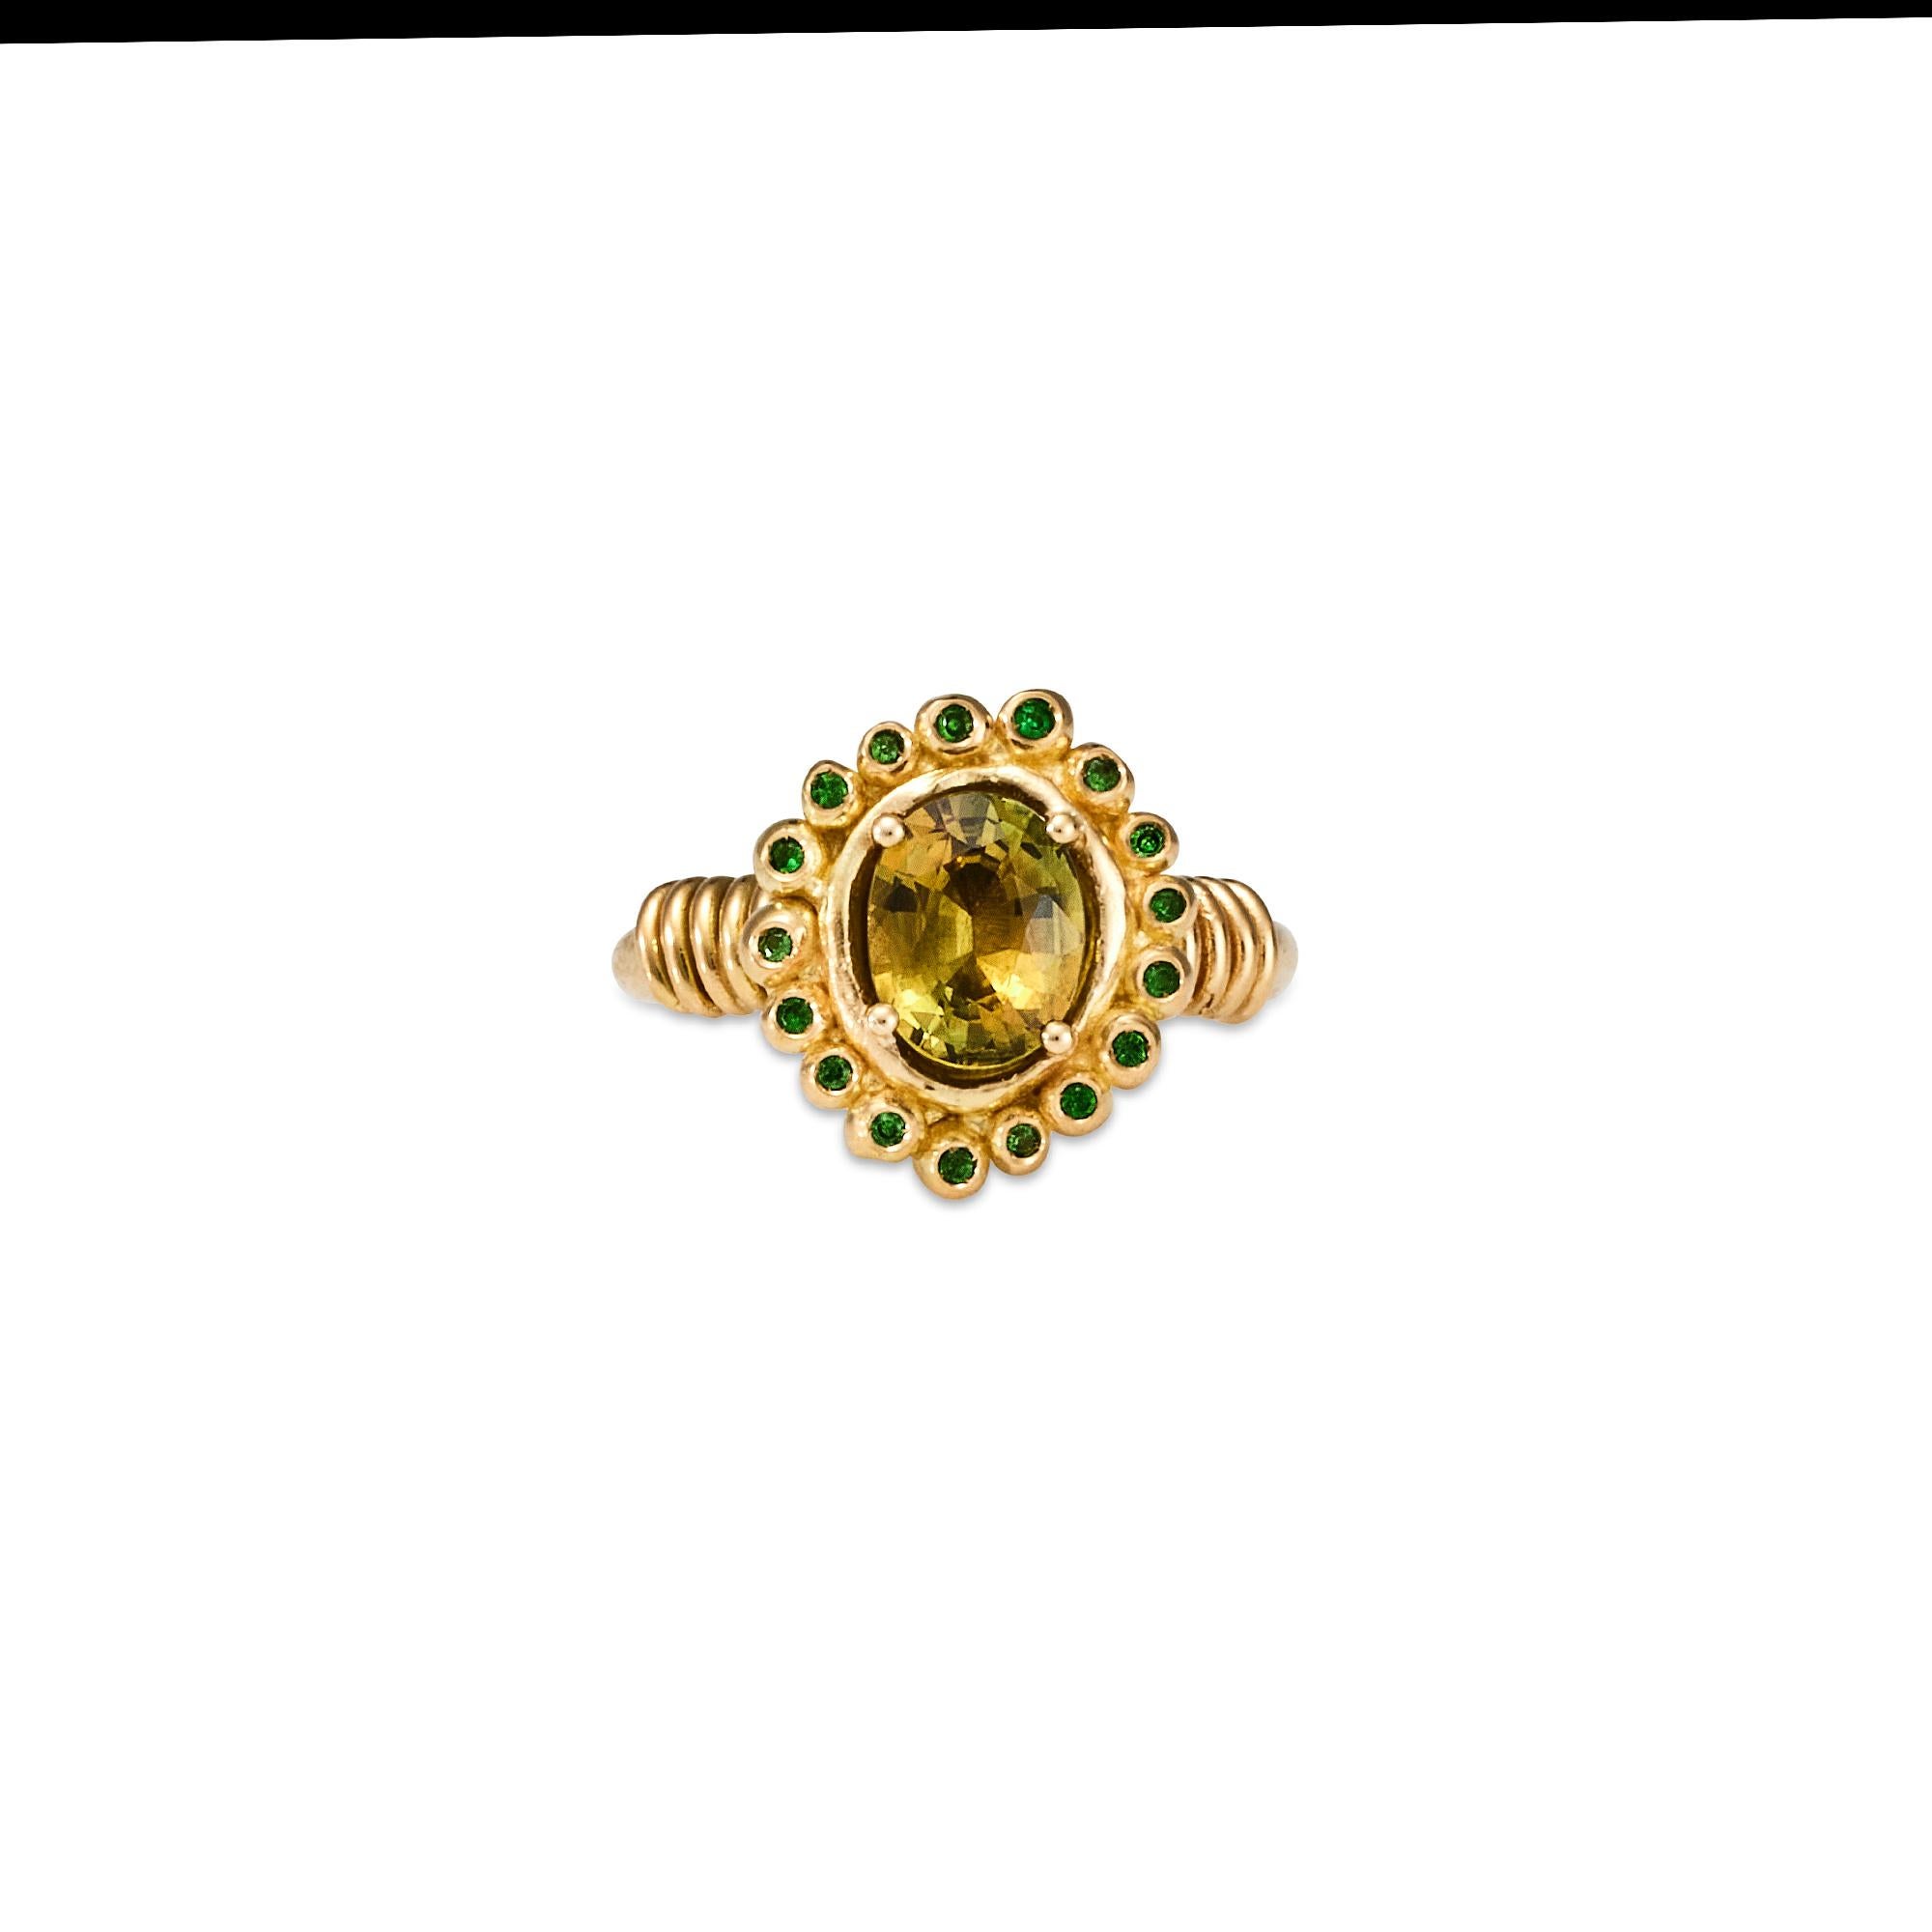 Eranthe Ring, 18 Karat Yellow Gold with Australian Yellow Sapphire and Tsavorite Garnets
Handcrafted and individually cast in solid gold. Olivia carves each piece from wax, making these items unique, which we believe is what gives them their beauty.